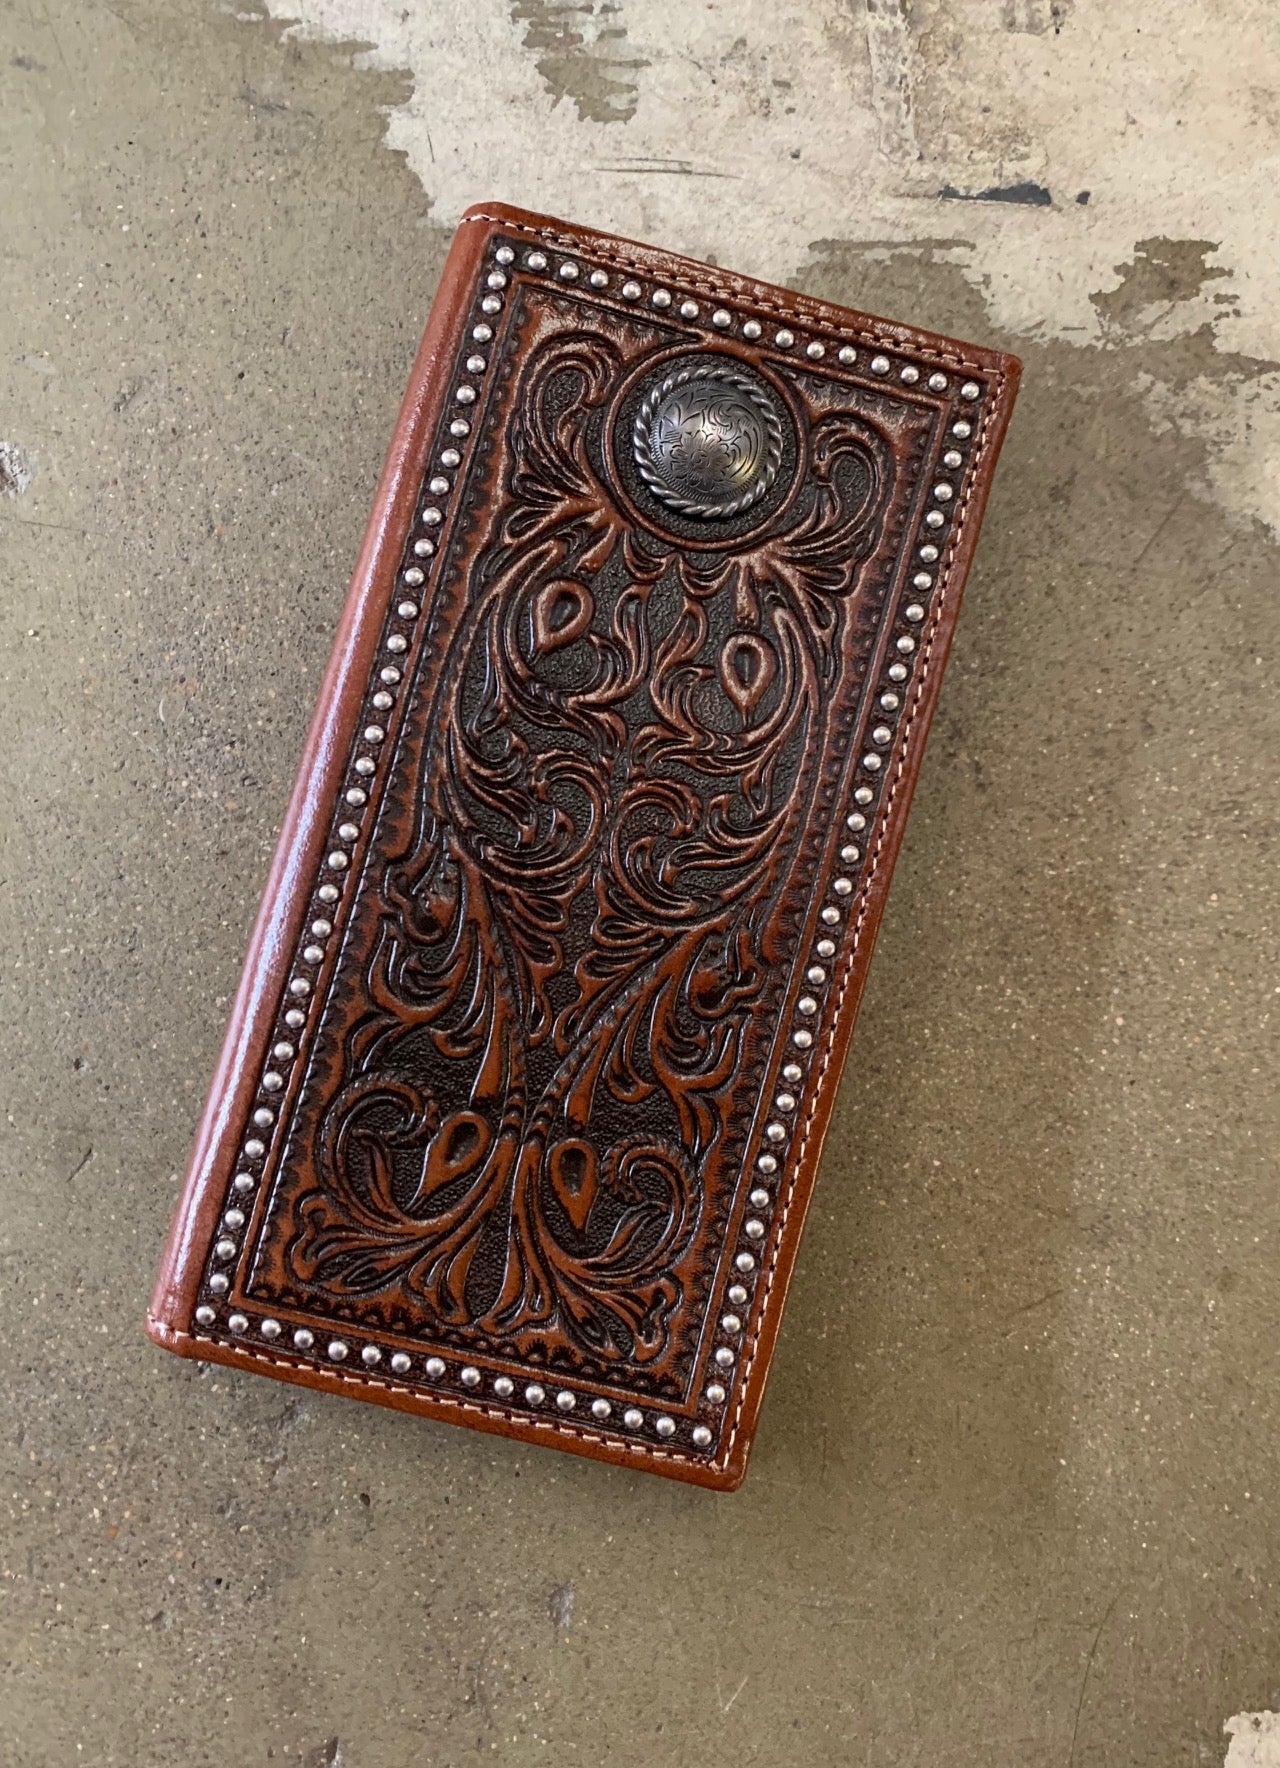 8138100 Roper Wallet Rodeo Tooled Leather Tan